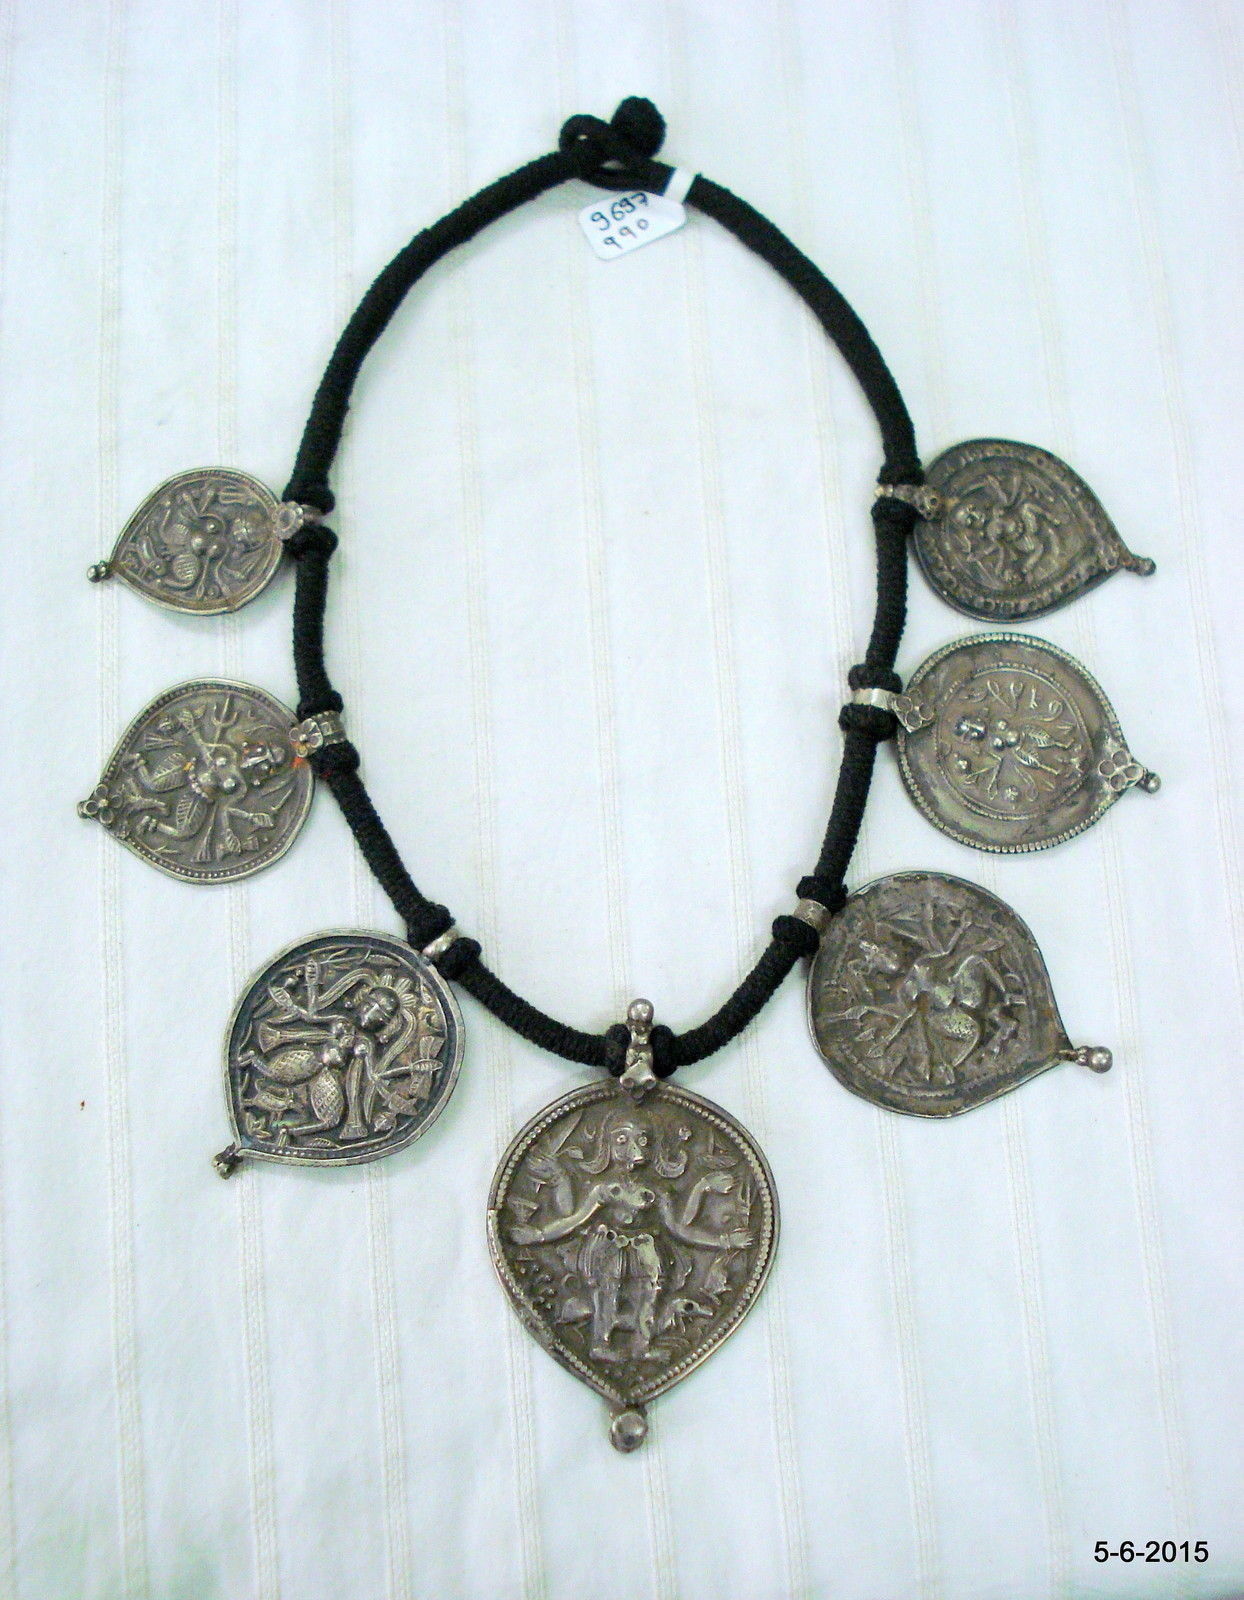 Primary image for ancient antique tribal old silver amulet pendant necklace hindu god goddess